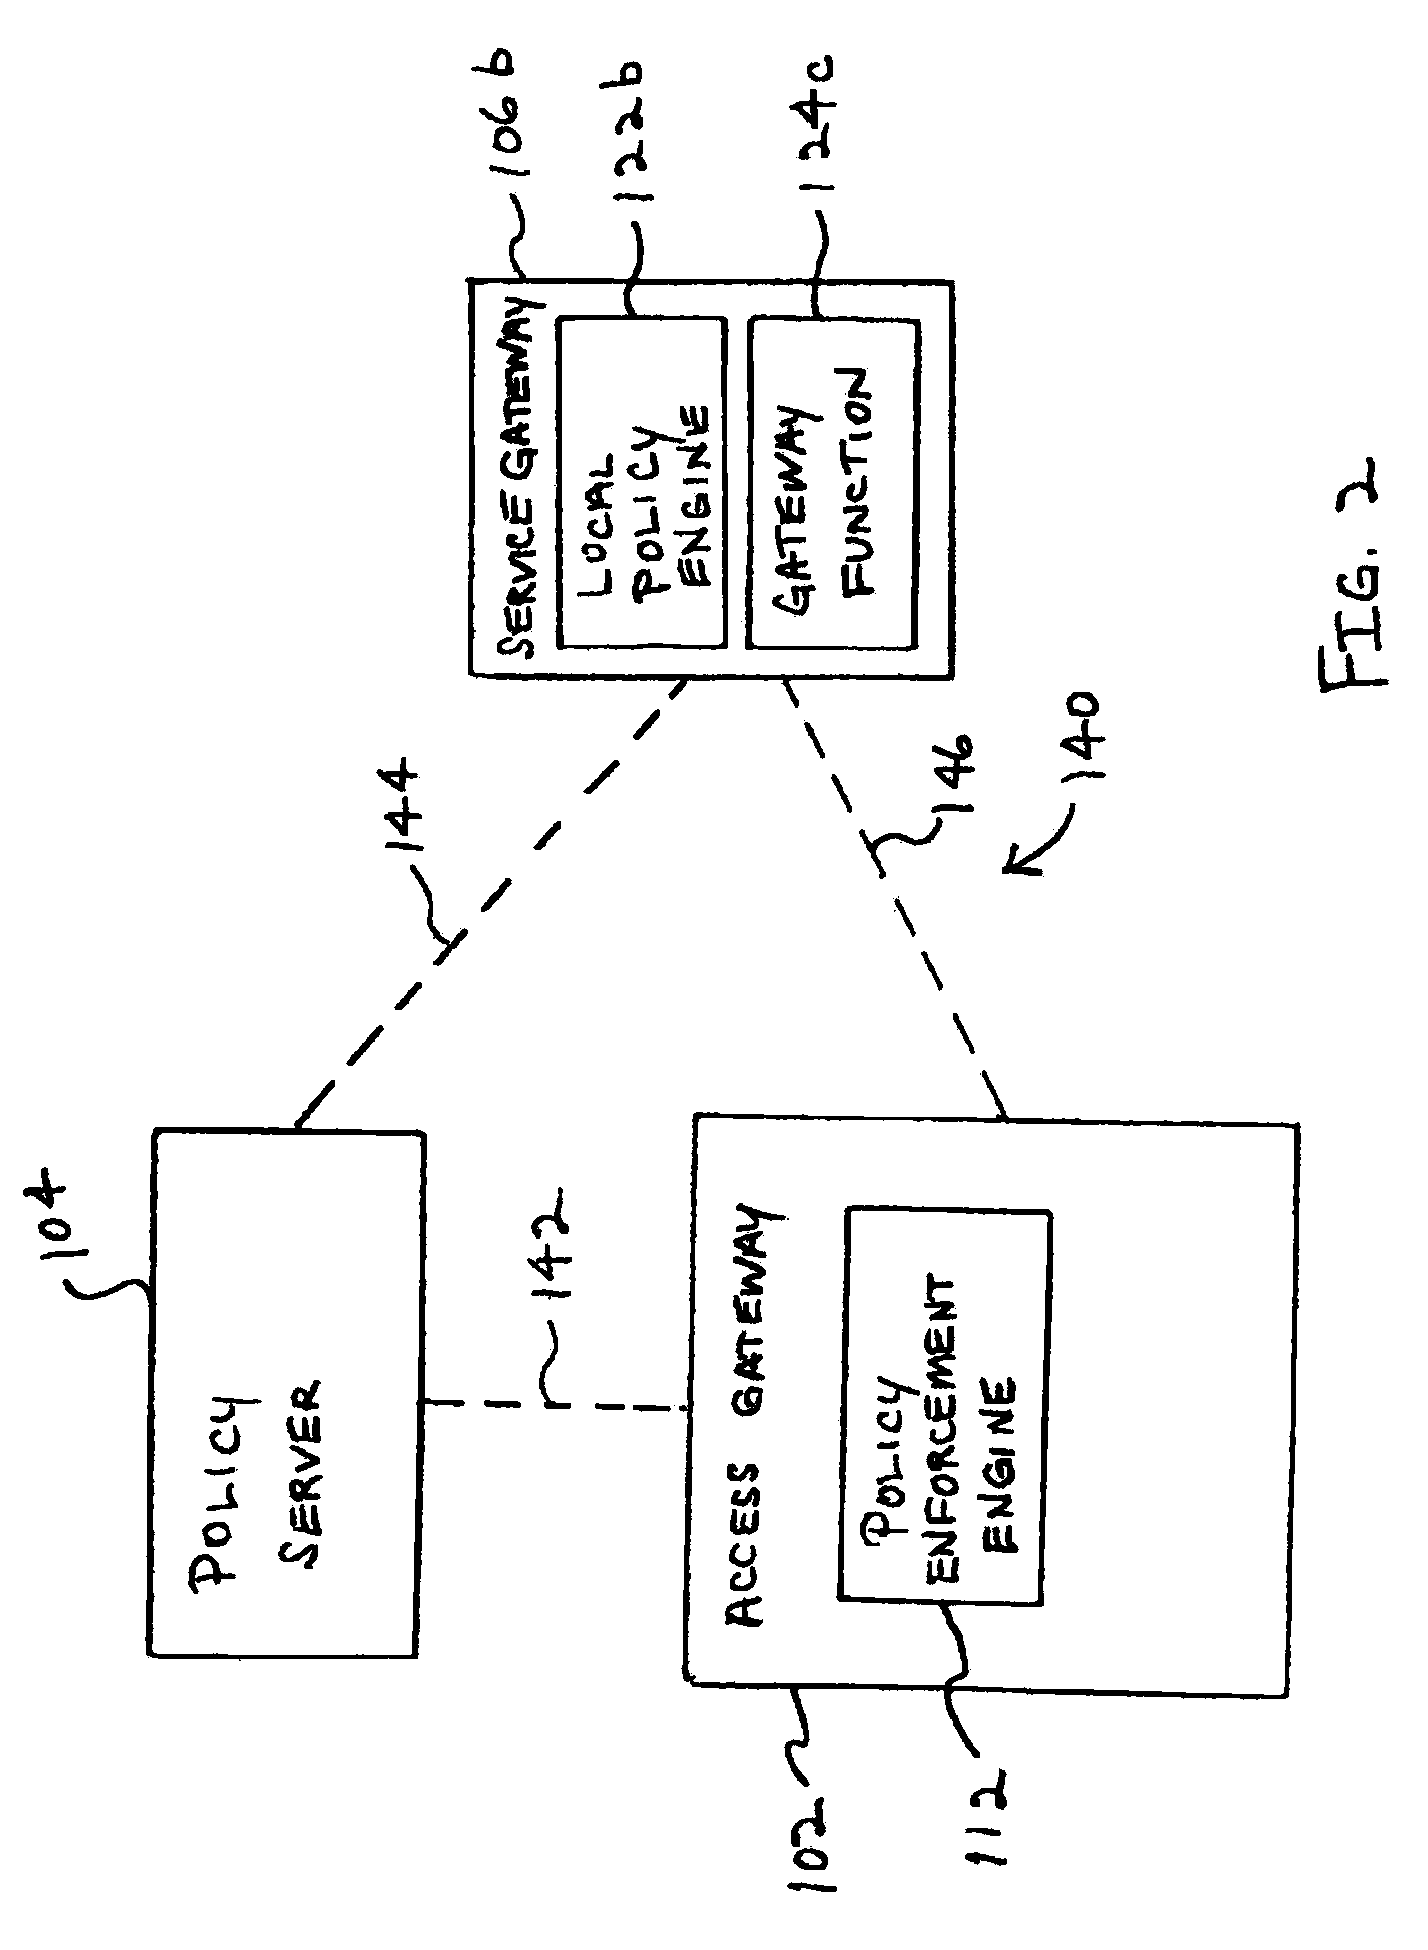 System and method for policy-enabled mobile service gateway